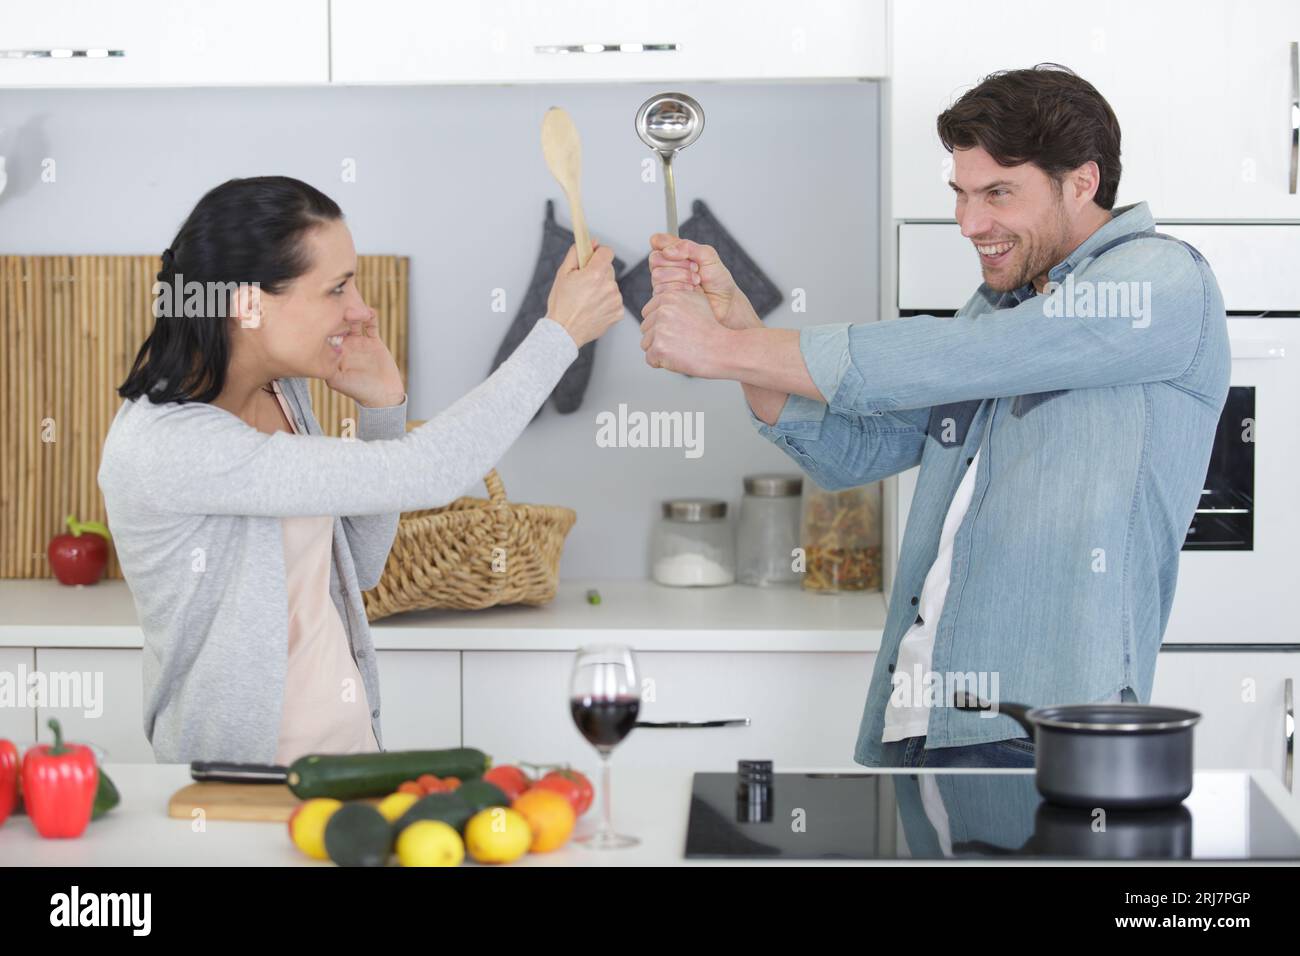 funny couple pretending fight with utensils tools while cooking Stock Photo